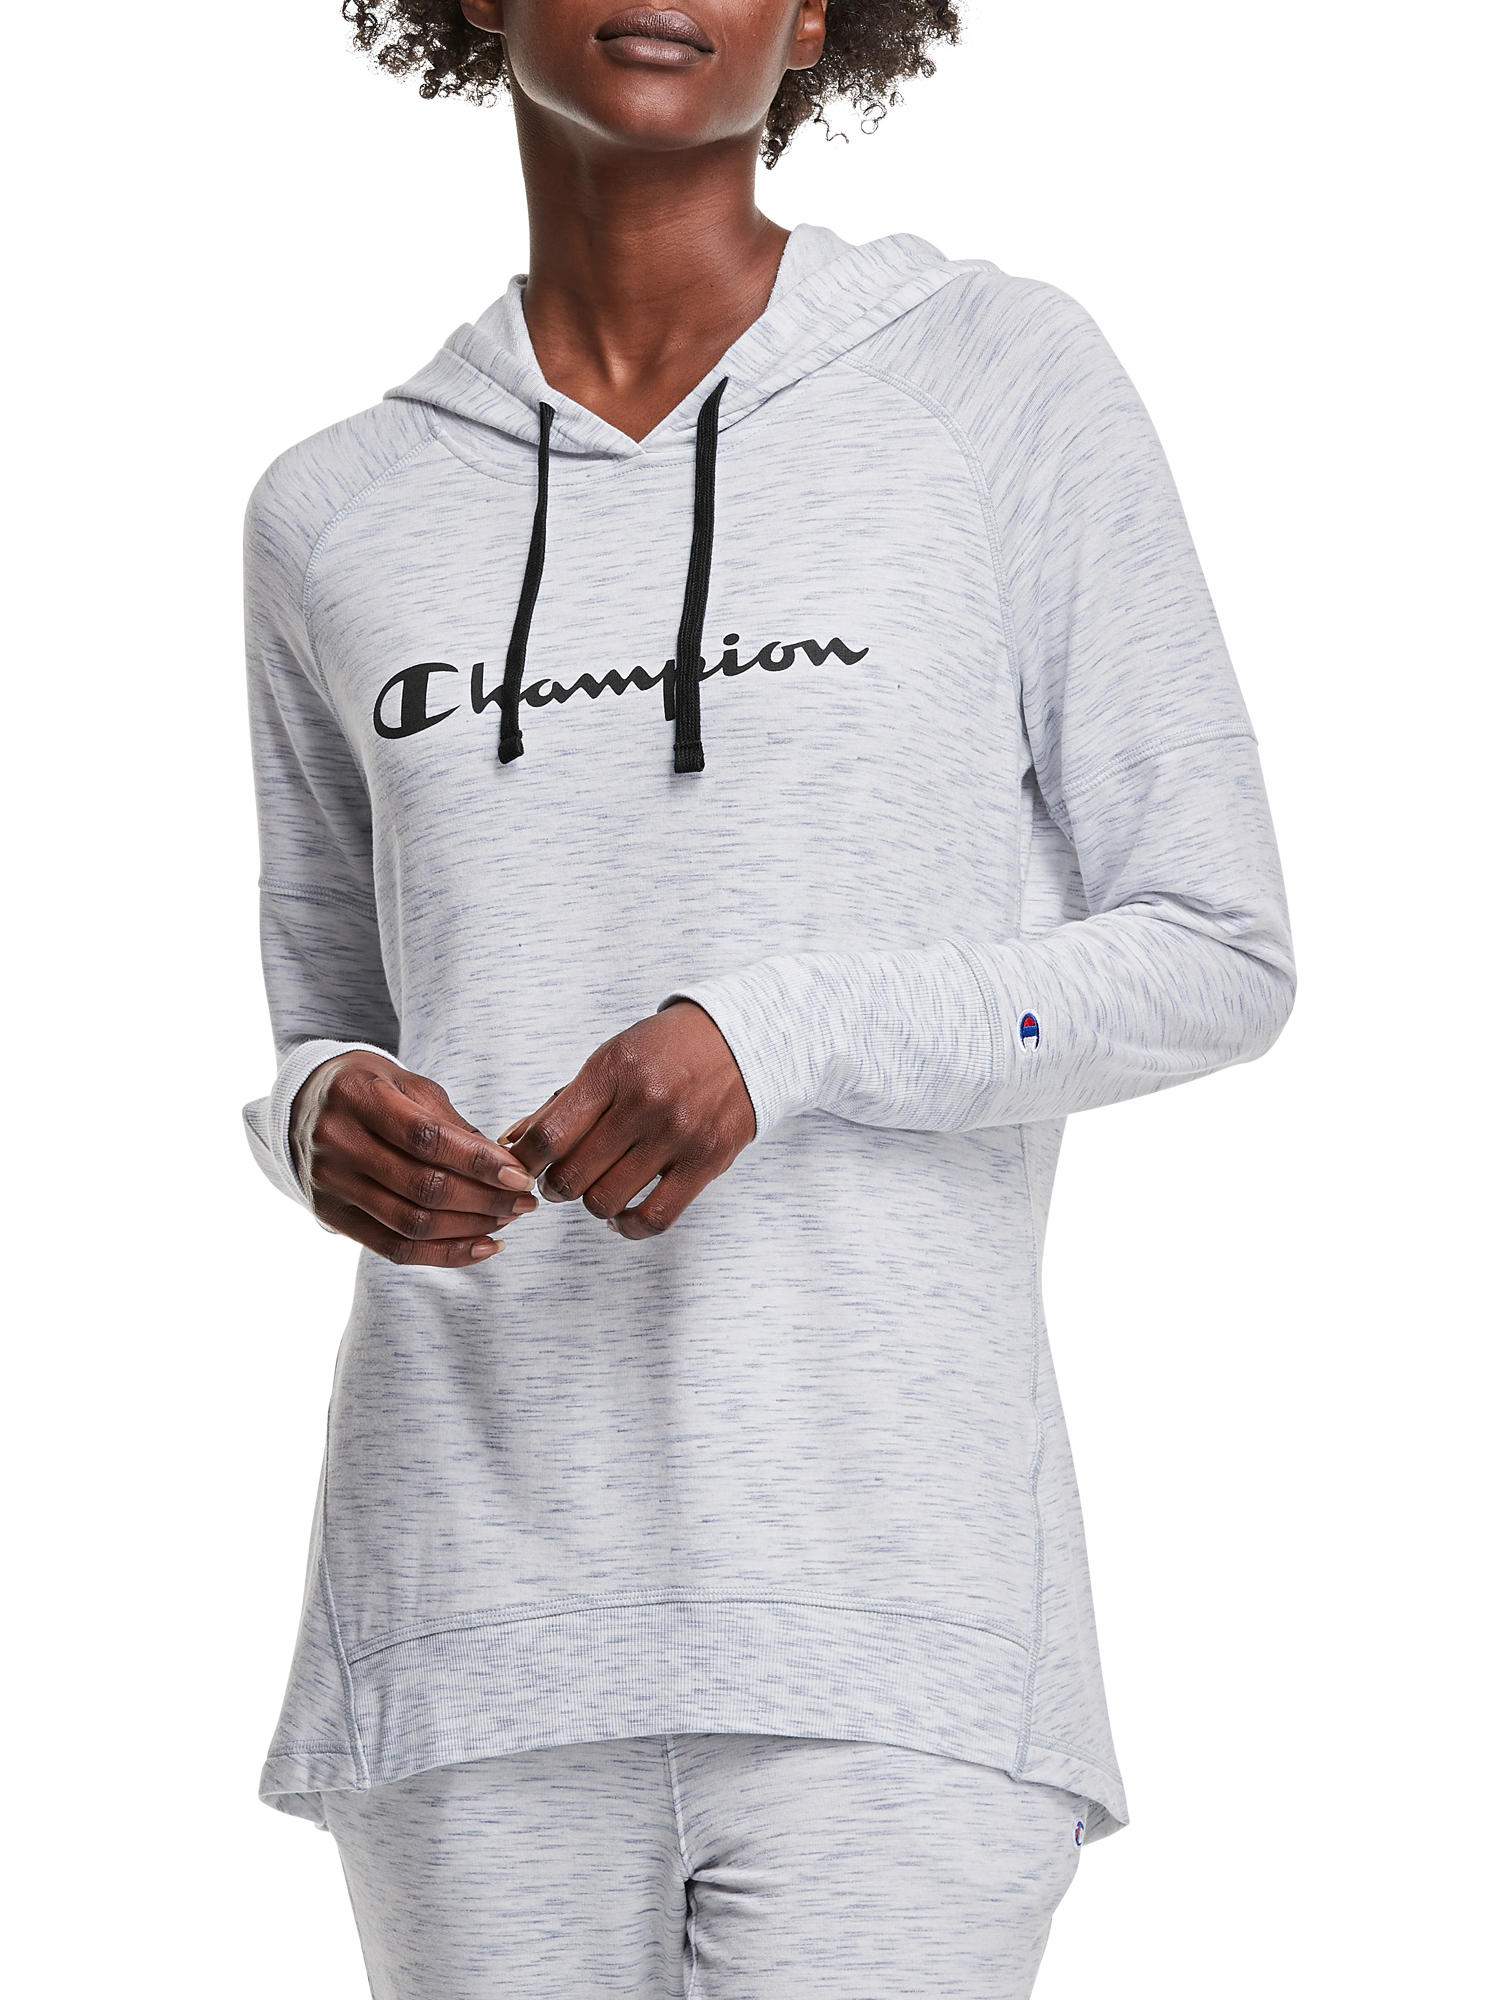 Champion Long Sleeve Stretchy Rayon, Polyester, Spandex Hoodie (Women's) 1 Pack - image 1 of 6